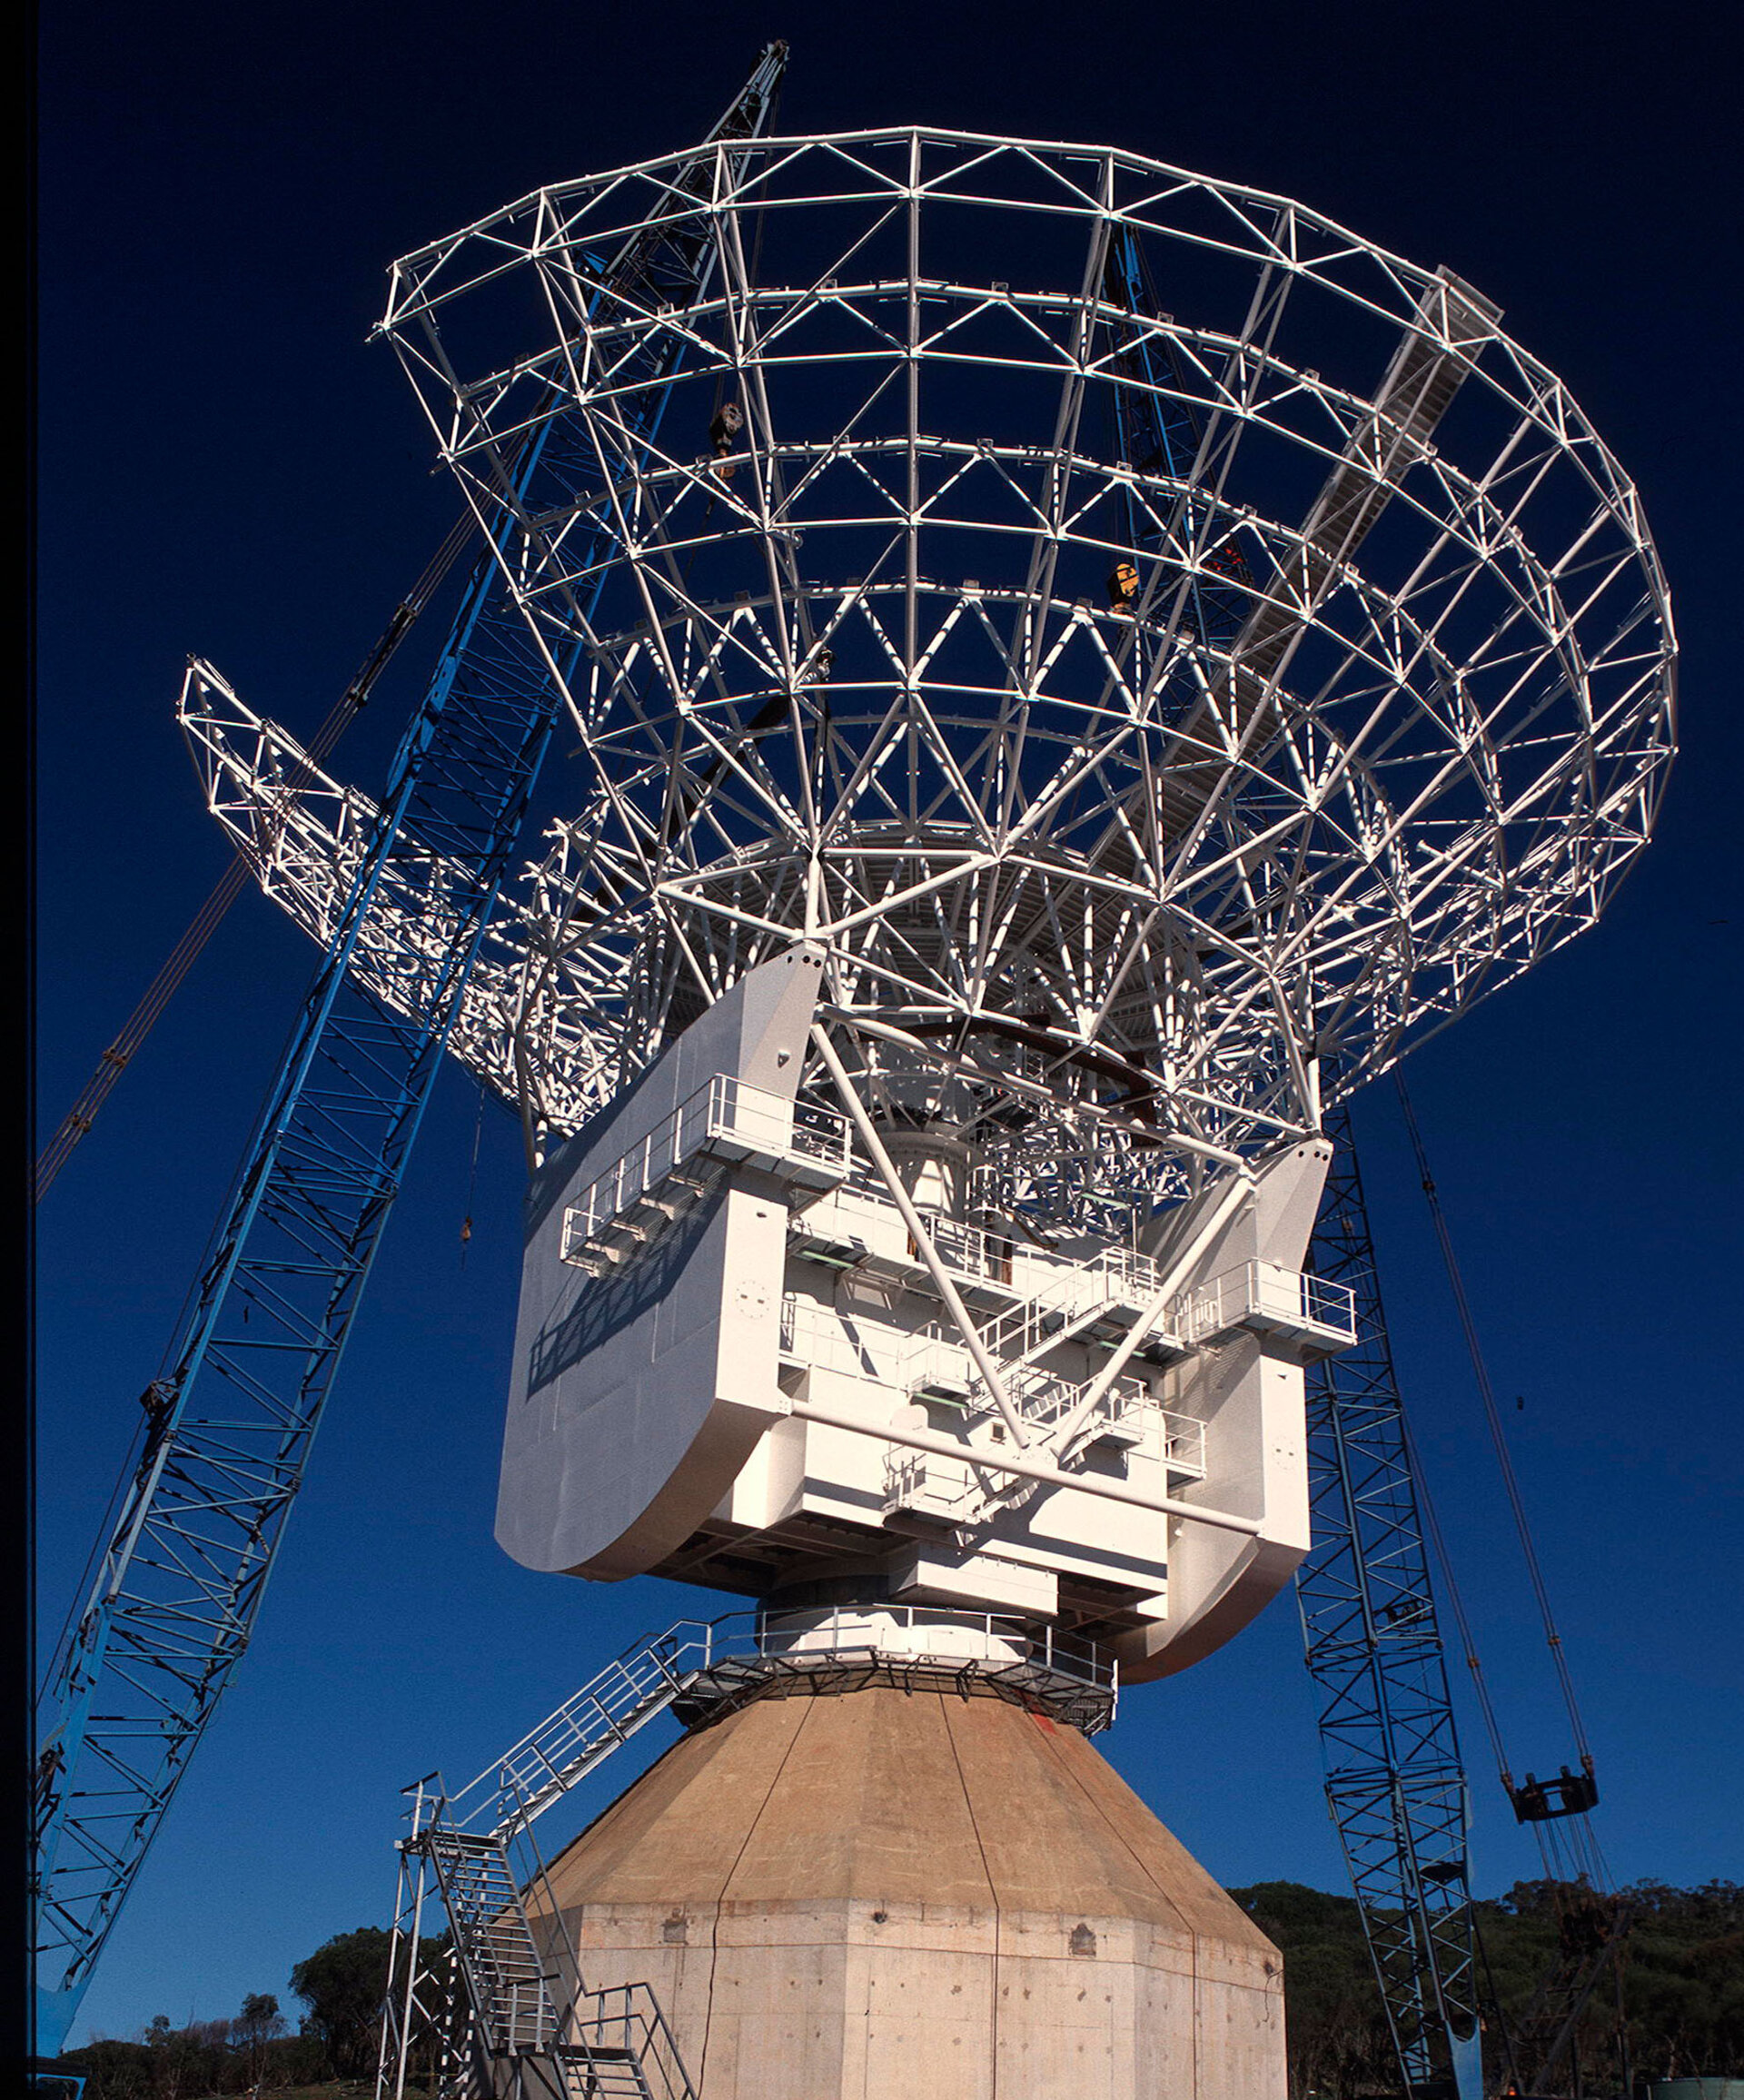 ESA's antenna at New Norcia, Western Australia, under construction in 2002